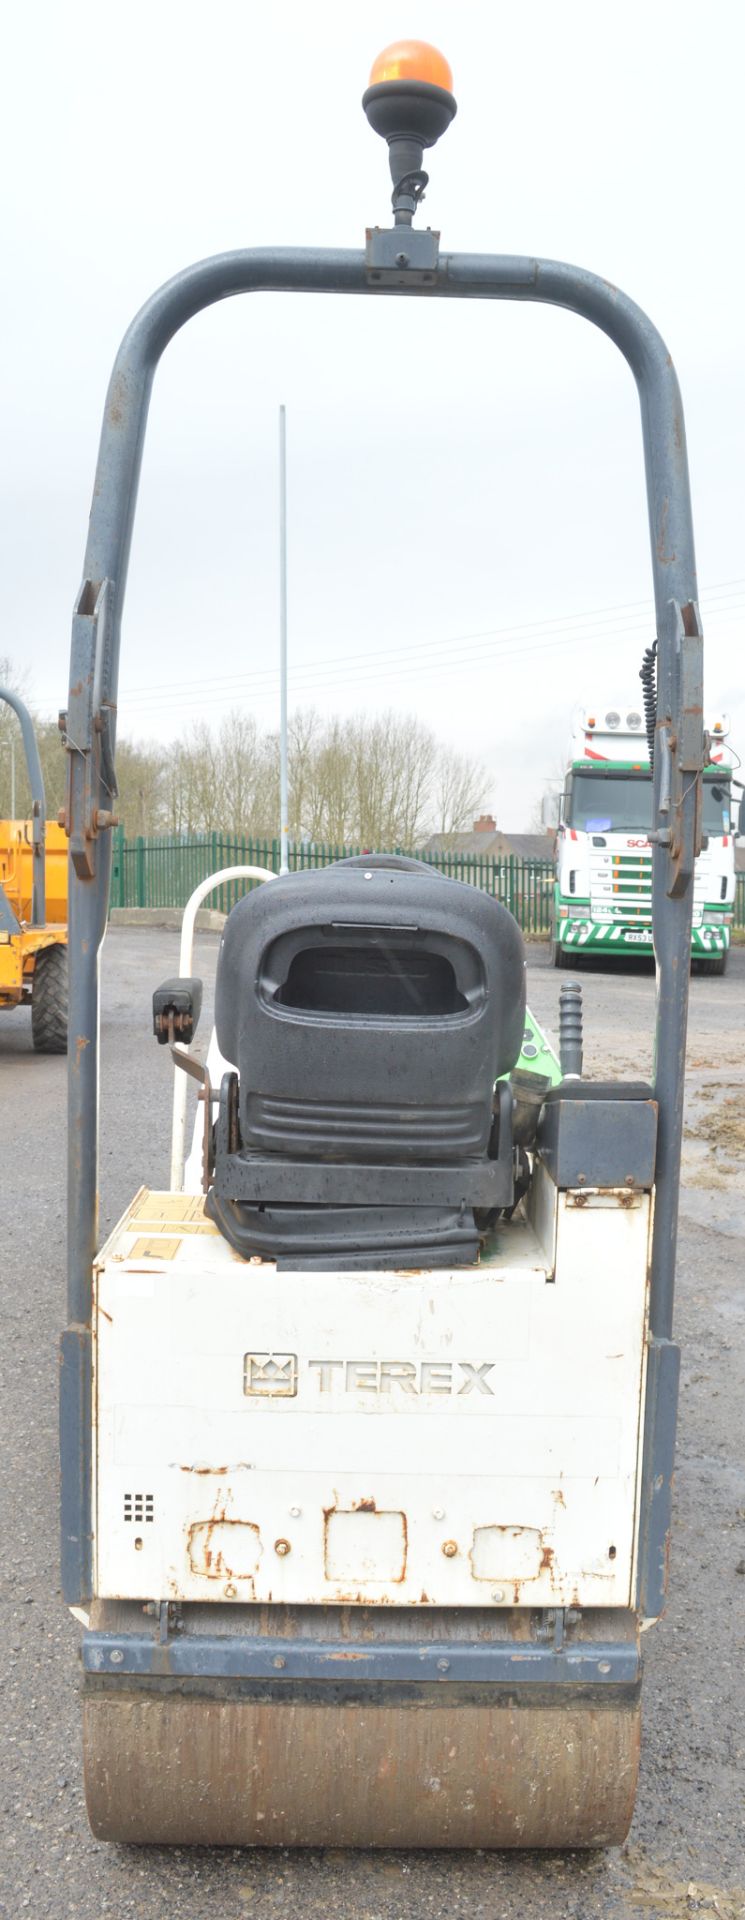 Benford Terex TV800 double drum ride on roller  Year: 2007 S/N: E706HU140  Recorded hours: 930 - Image 3 of 7